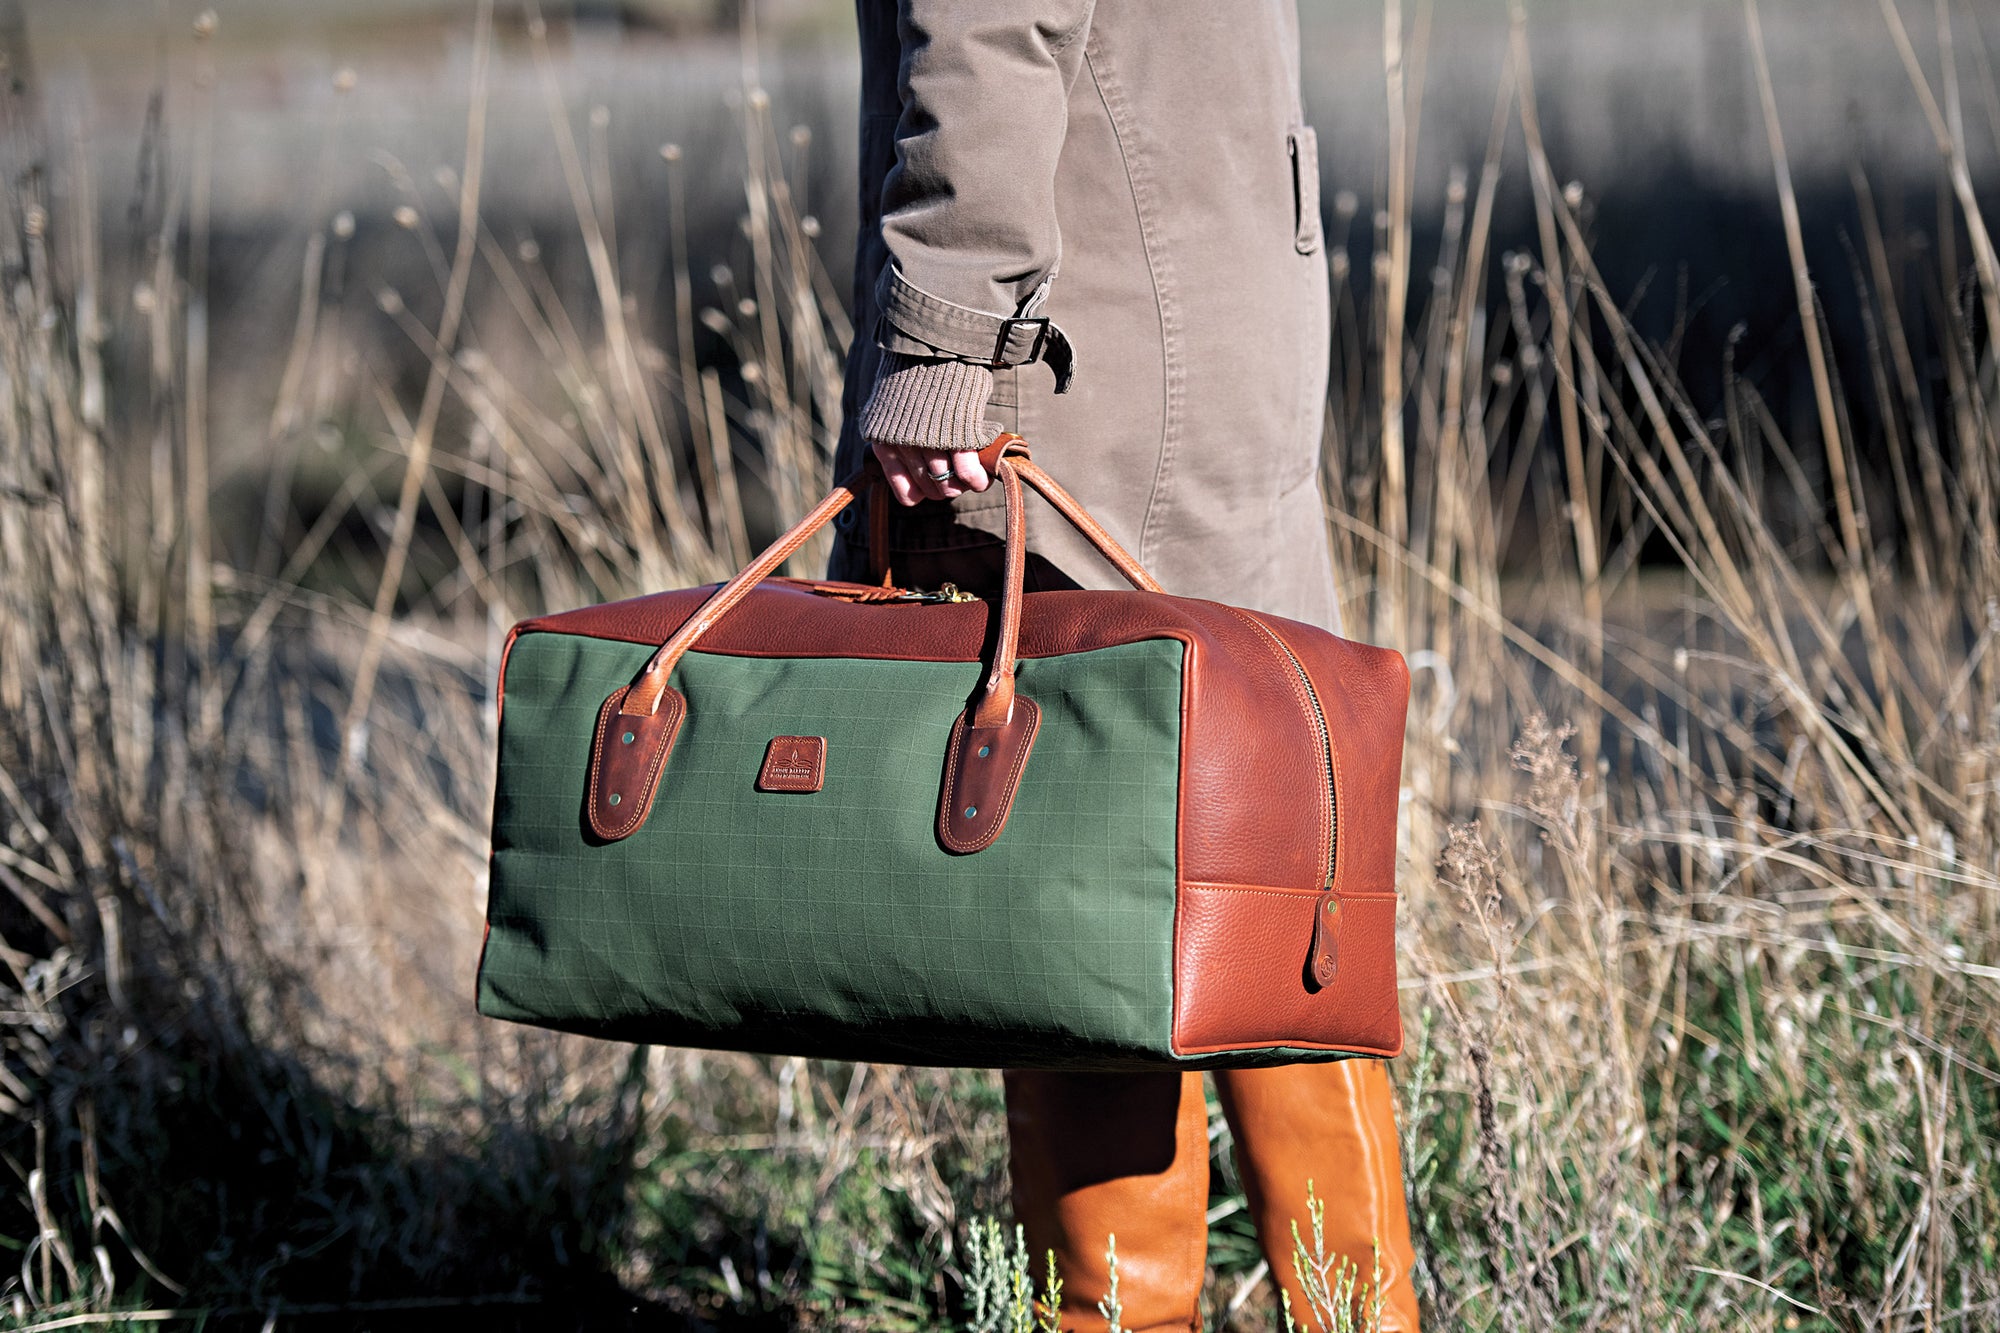 Weekender Travel Bag - Green Canvas with Tan Leather Trim